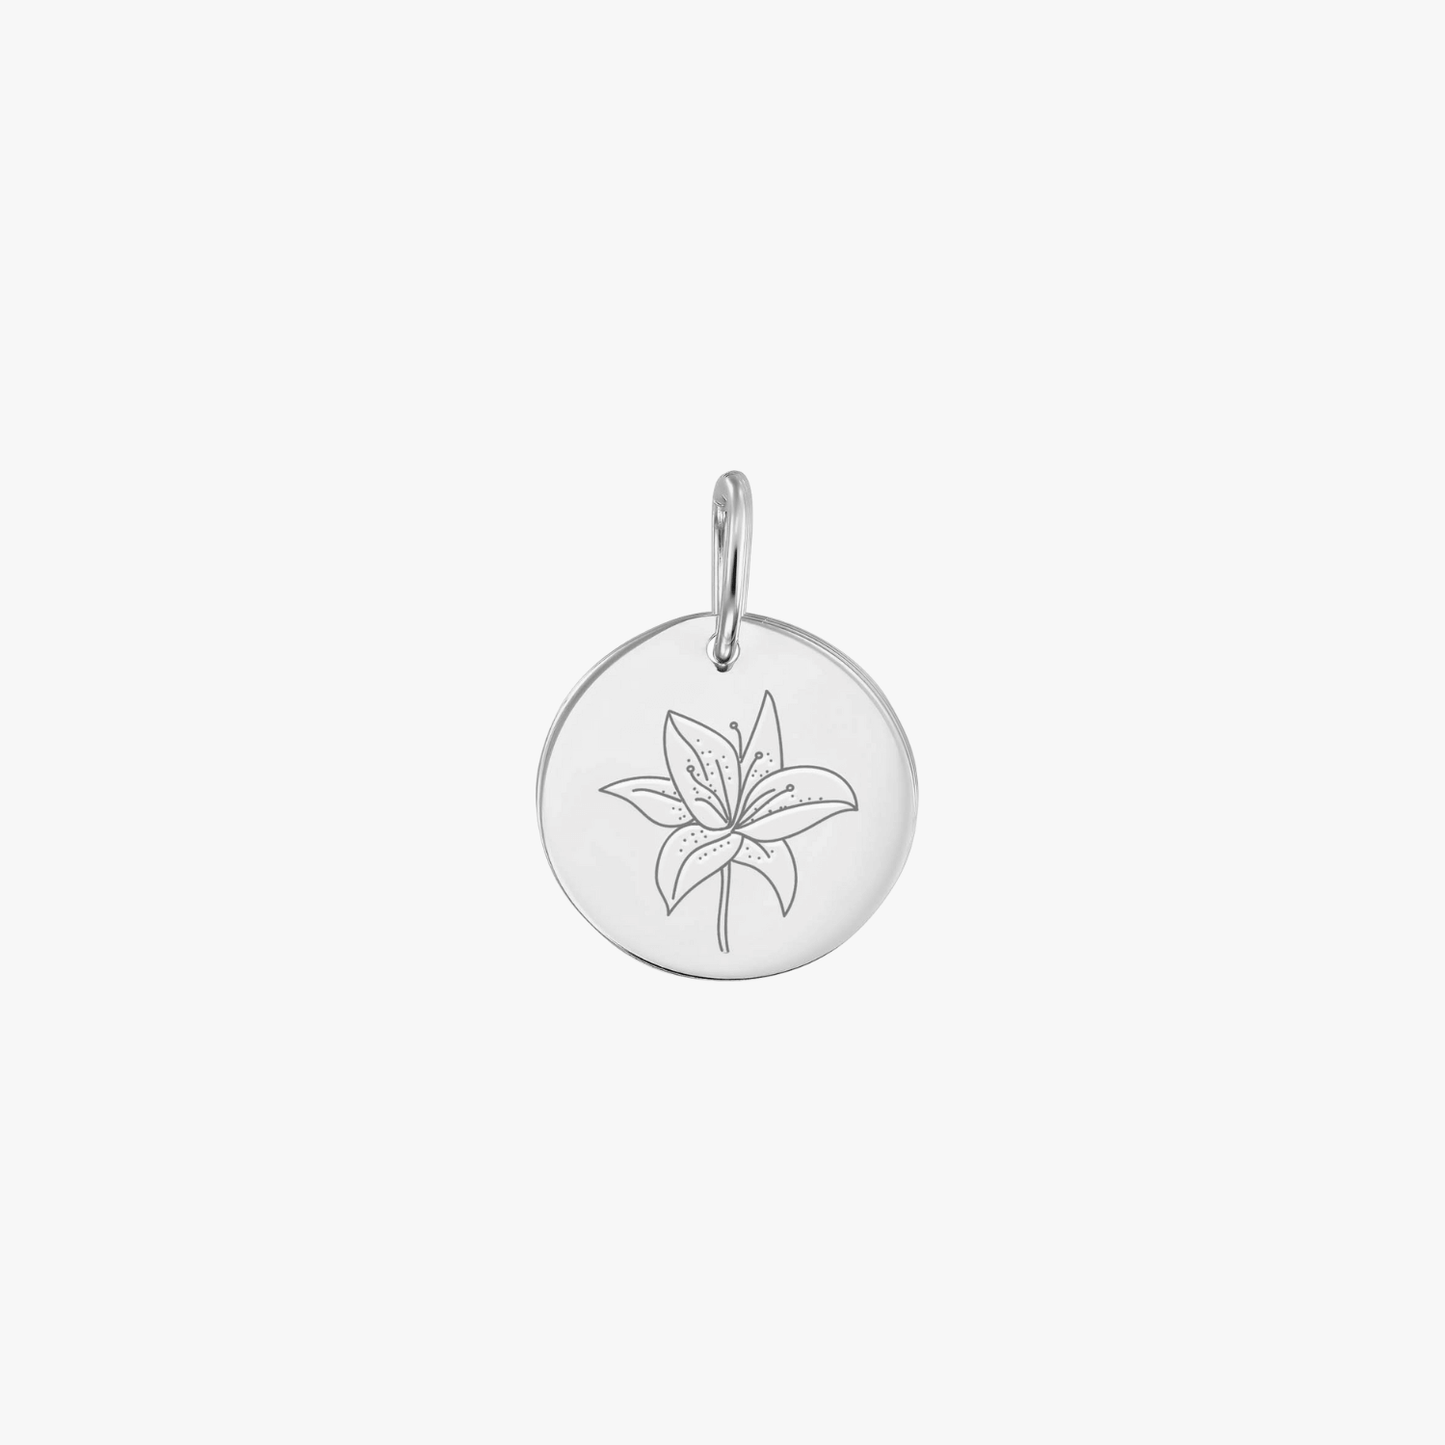 Birth Flower - May Lily white gold pendant